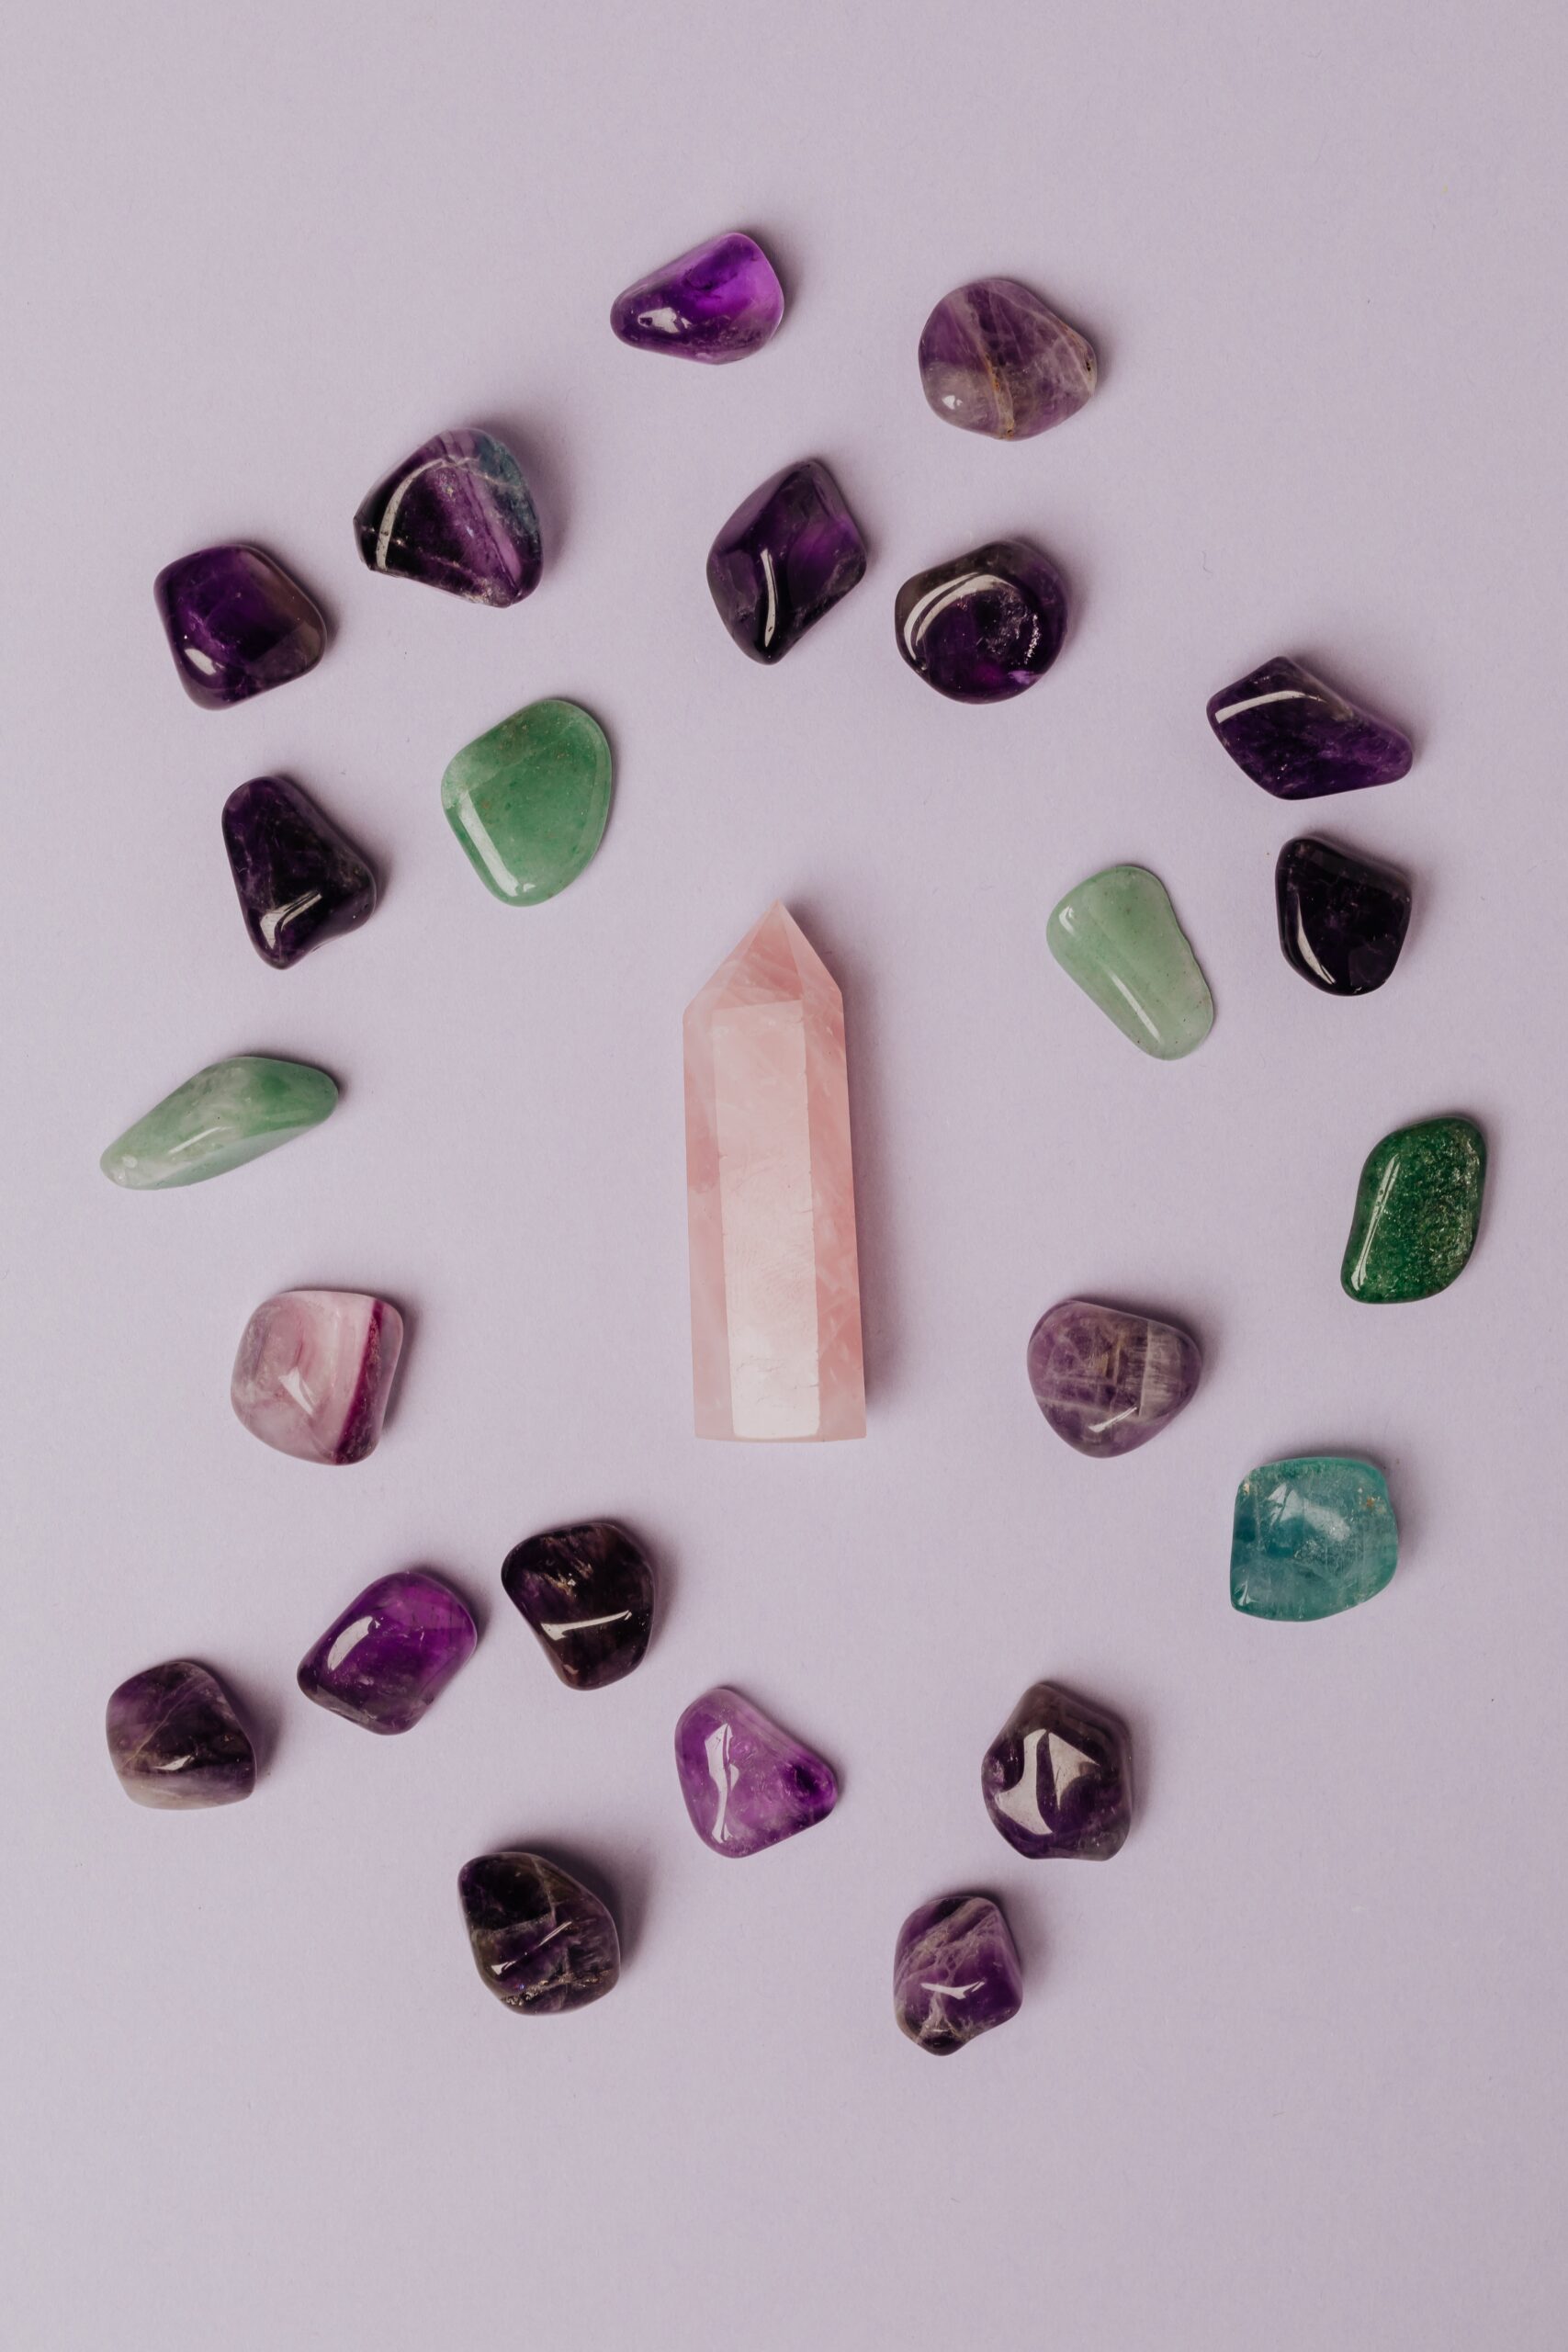 The Beginner’s Guide To Crystals, Which Ones To Use And When